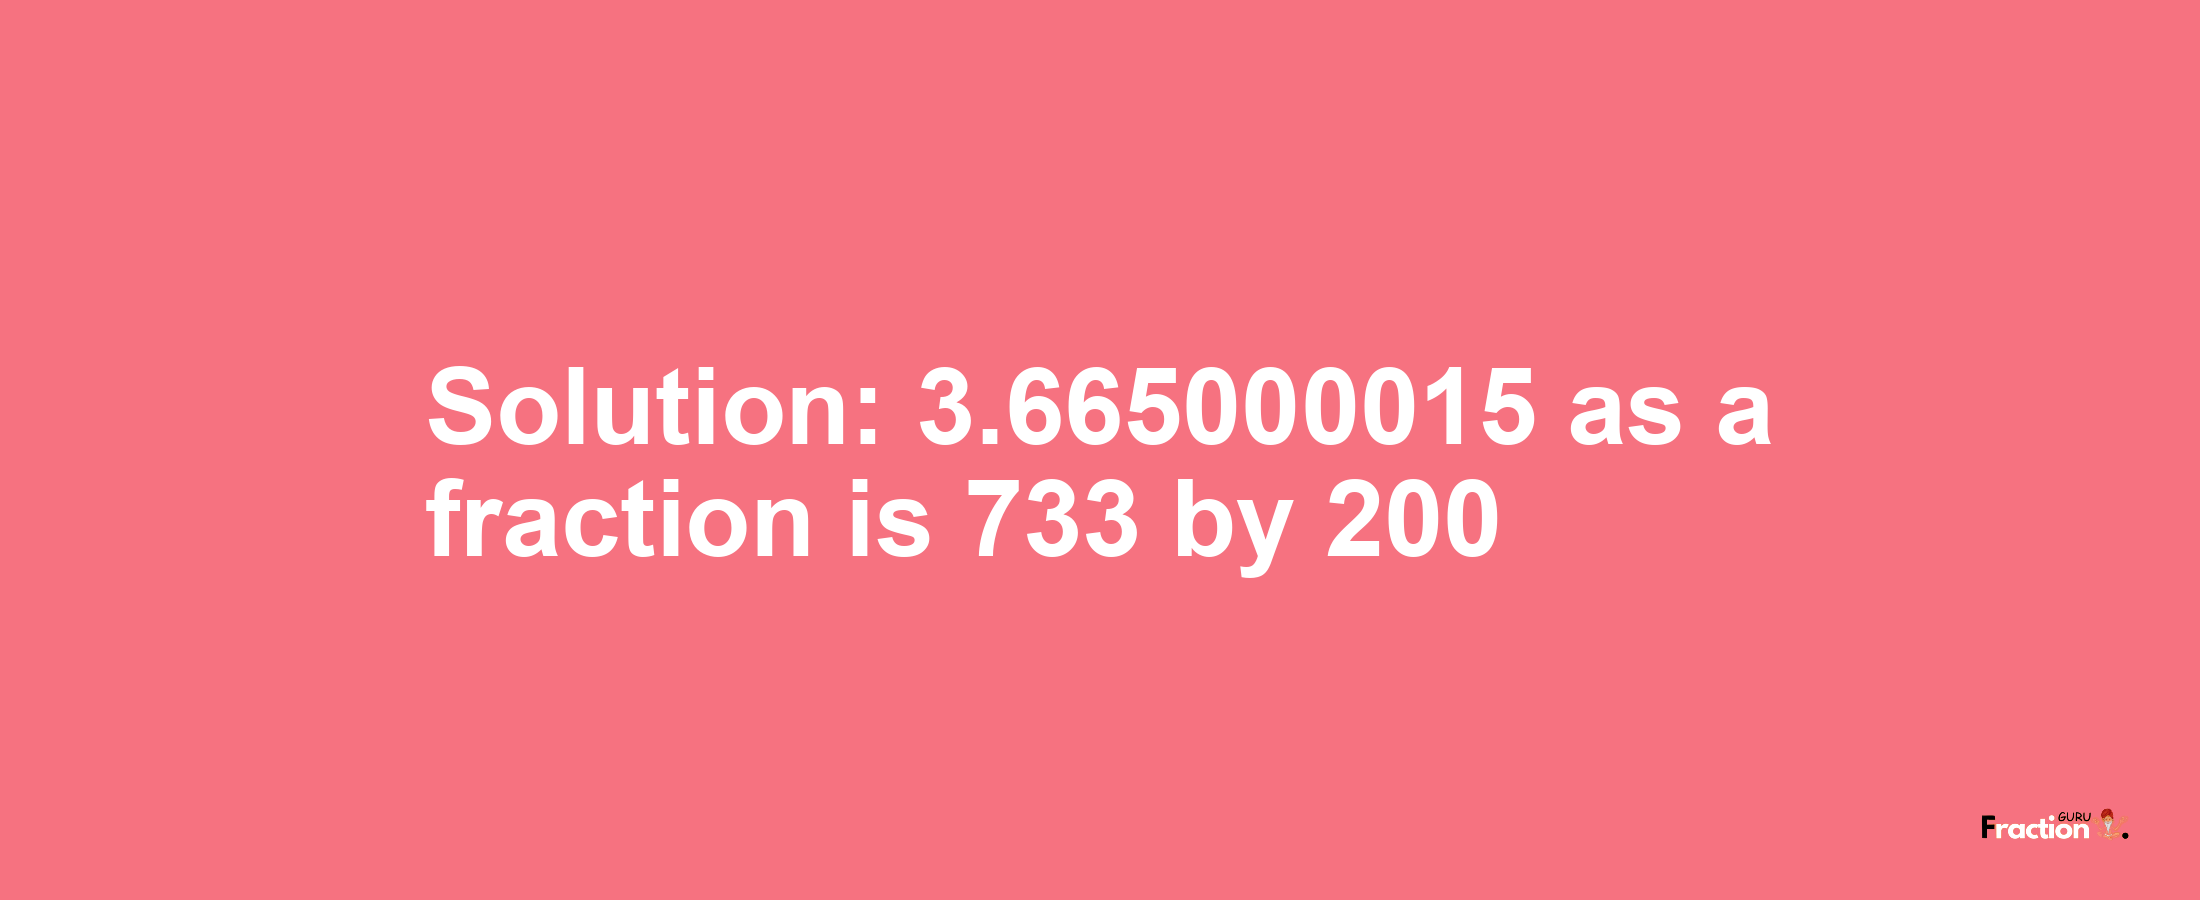 Solution:3.665000015 as a fraction is 733/200